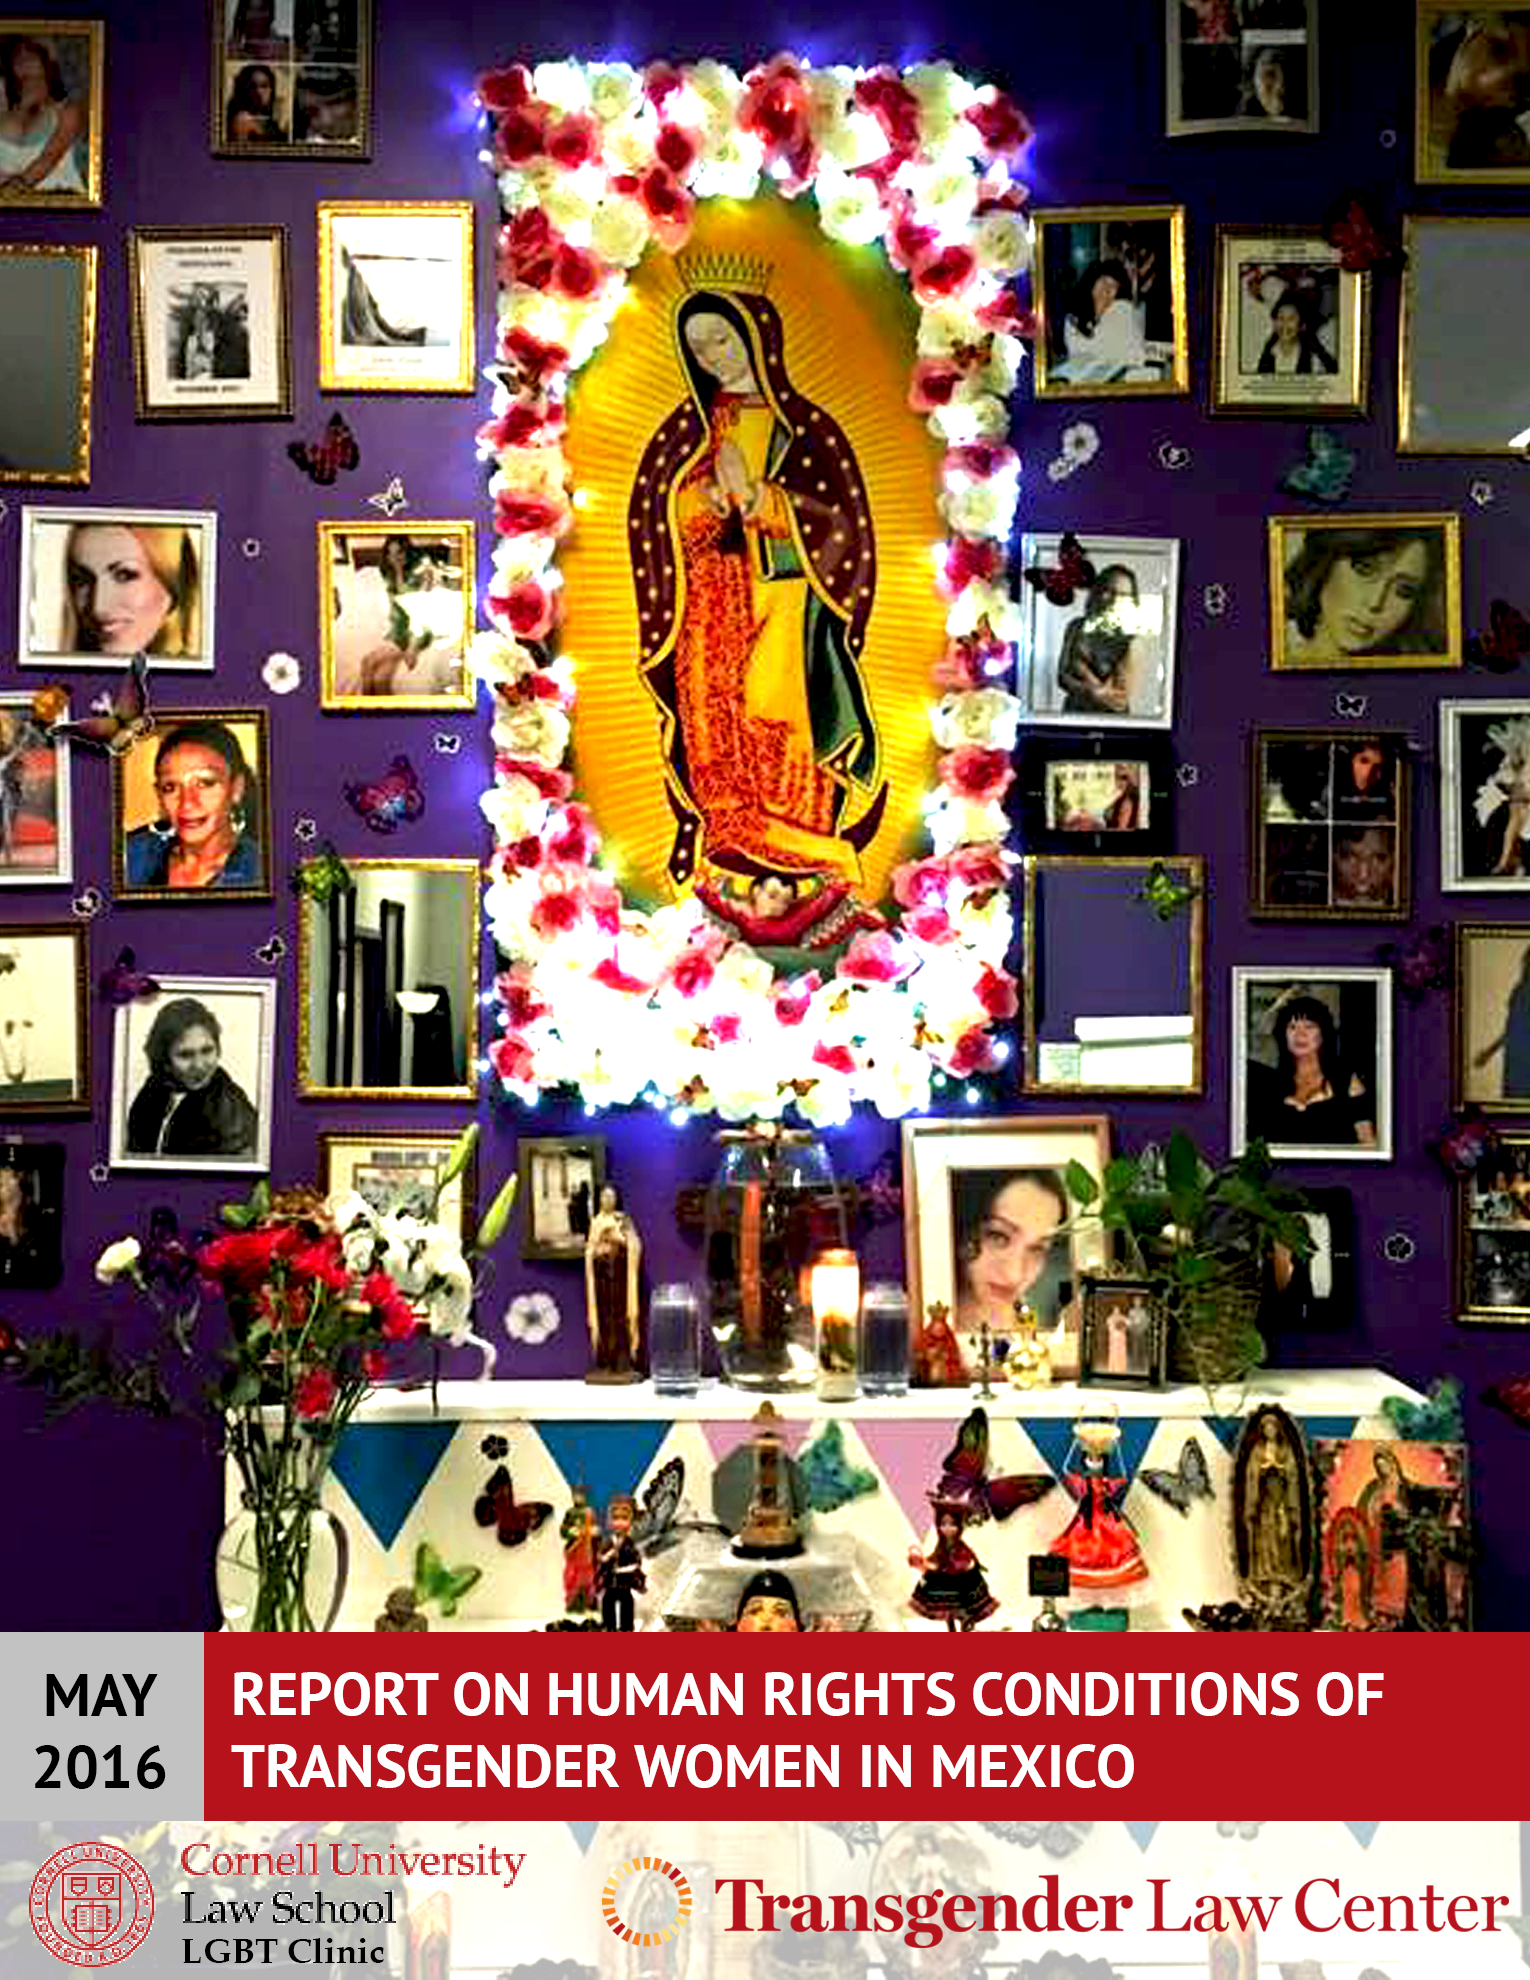 New report finds human rights violations pervasive against transgender women in Mexico